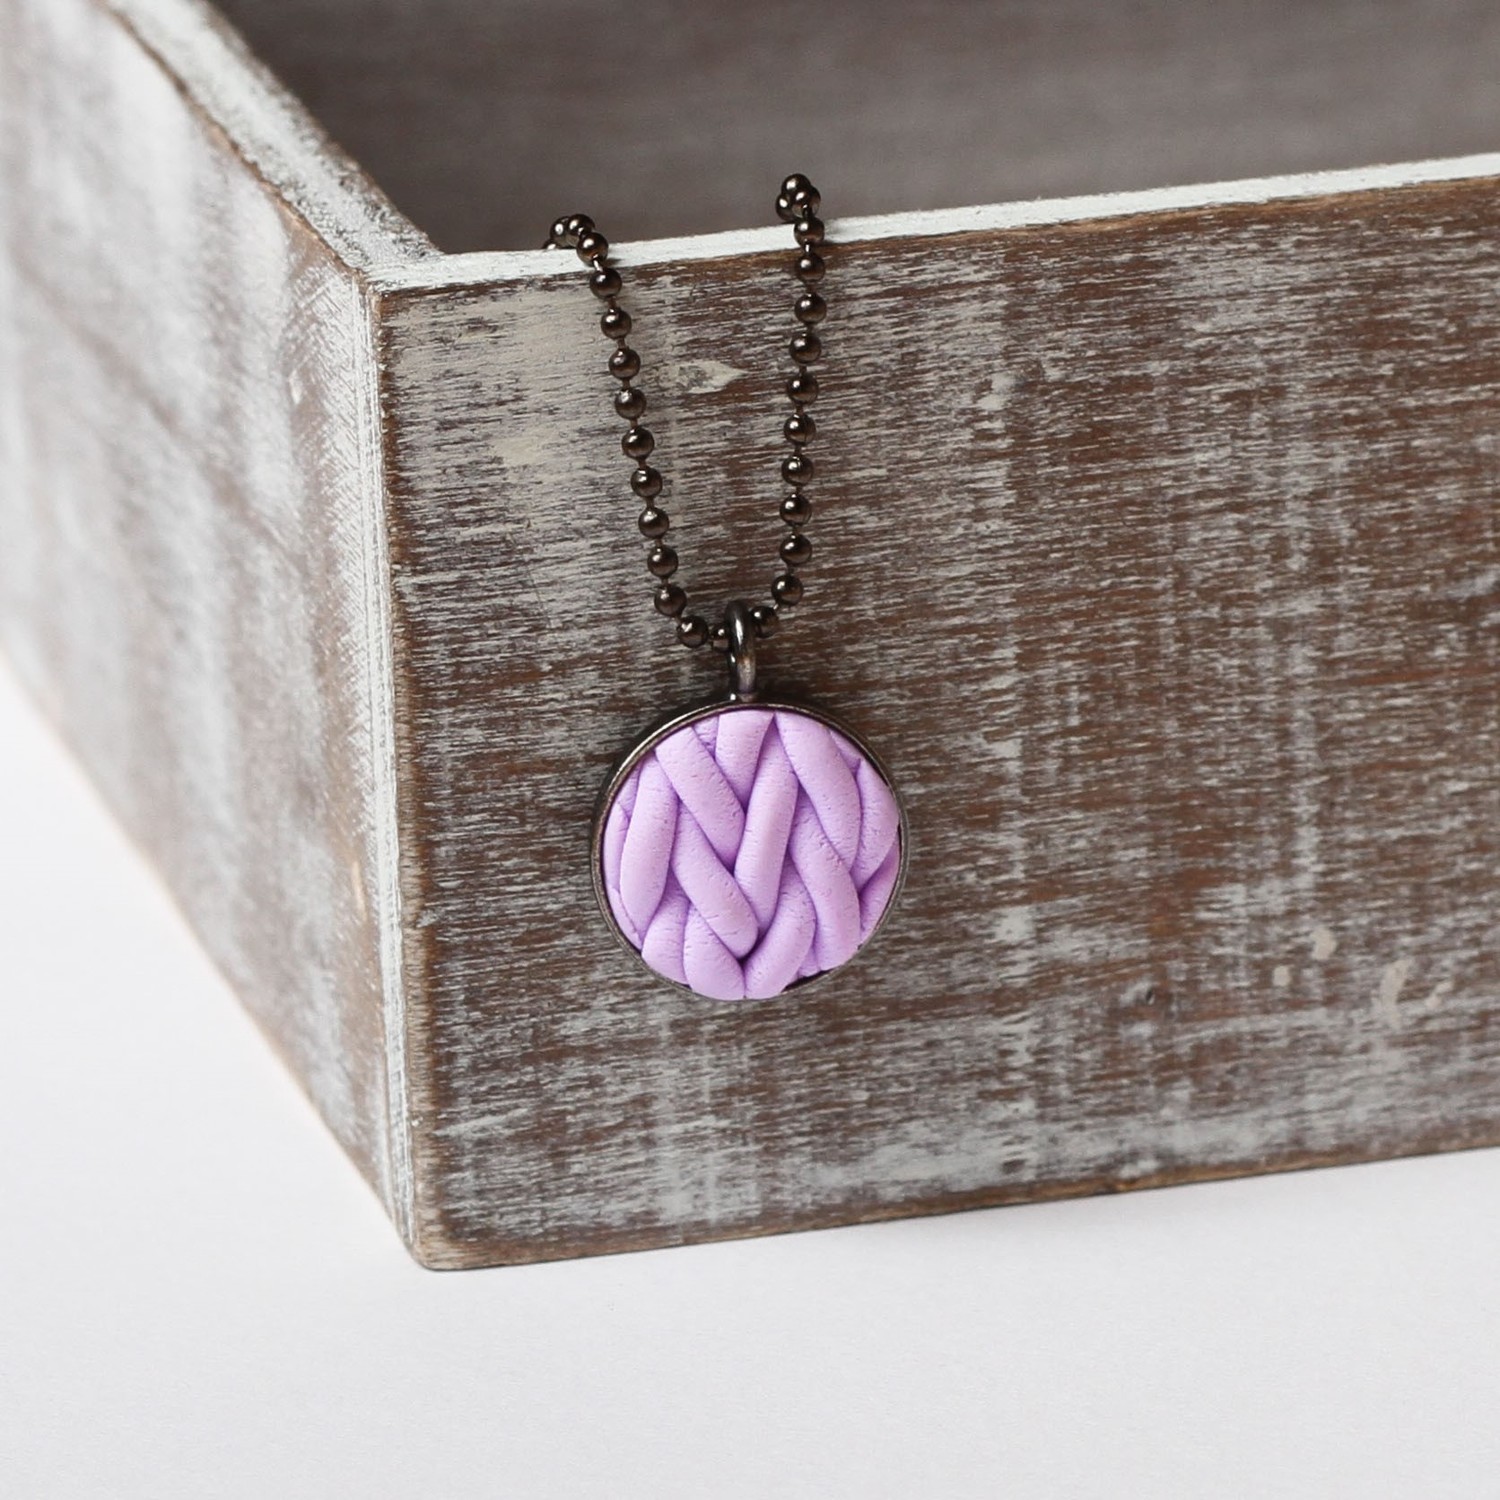 Lilac Knit Braided Style Pattern Chain Pendant